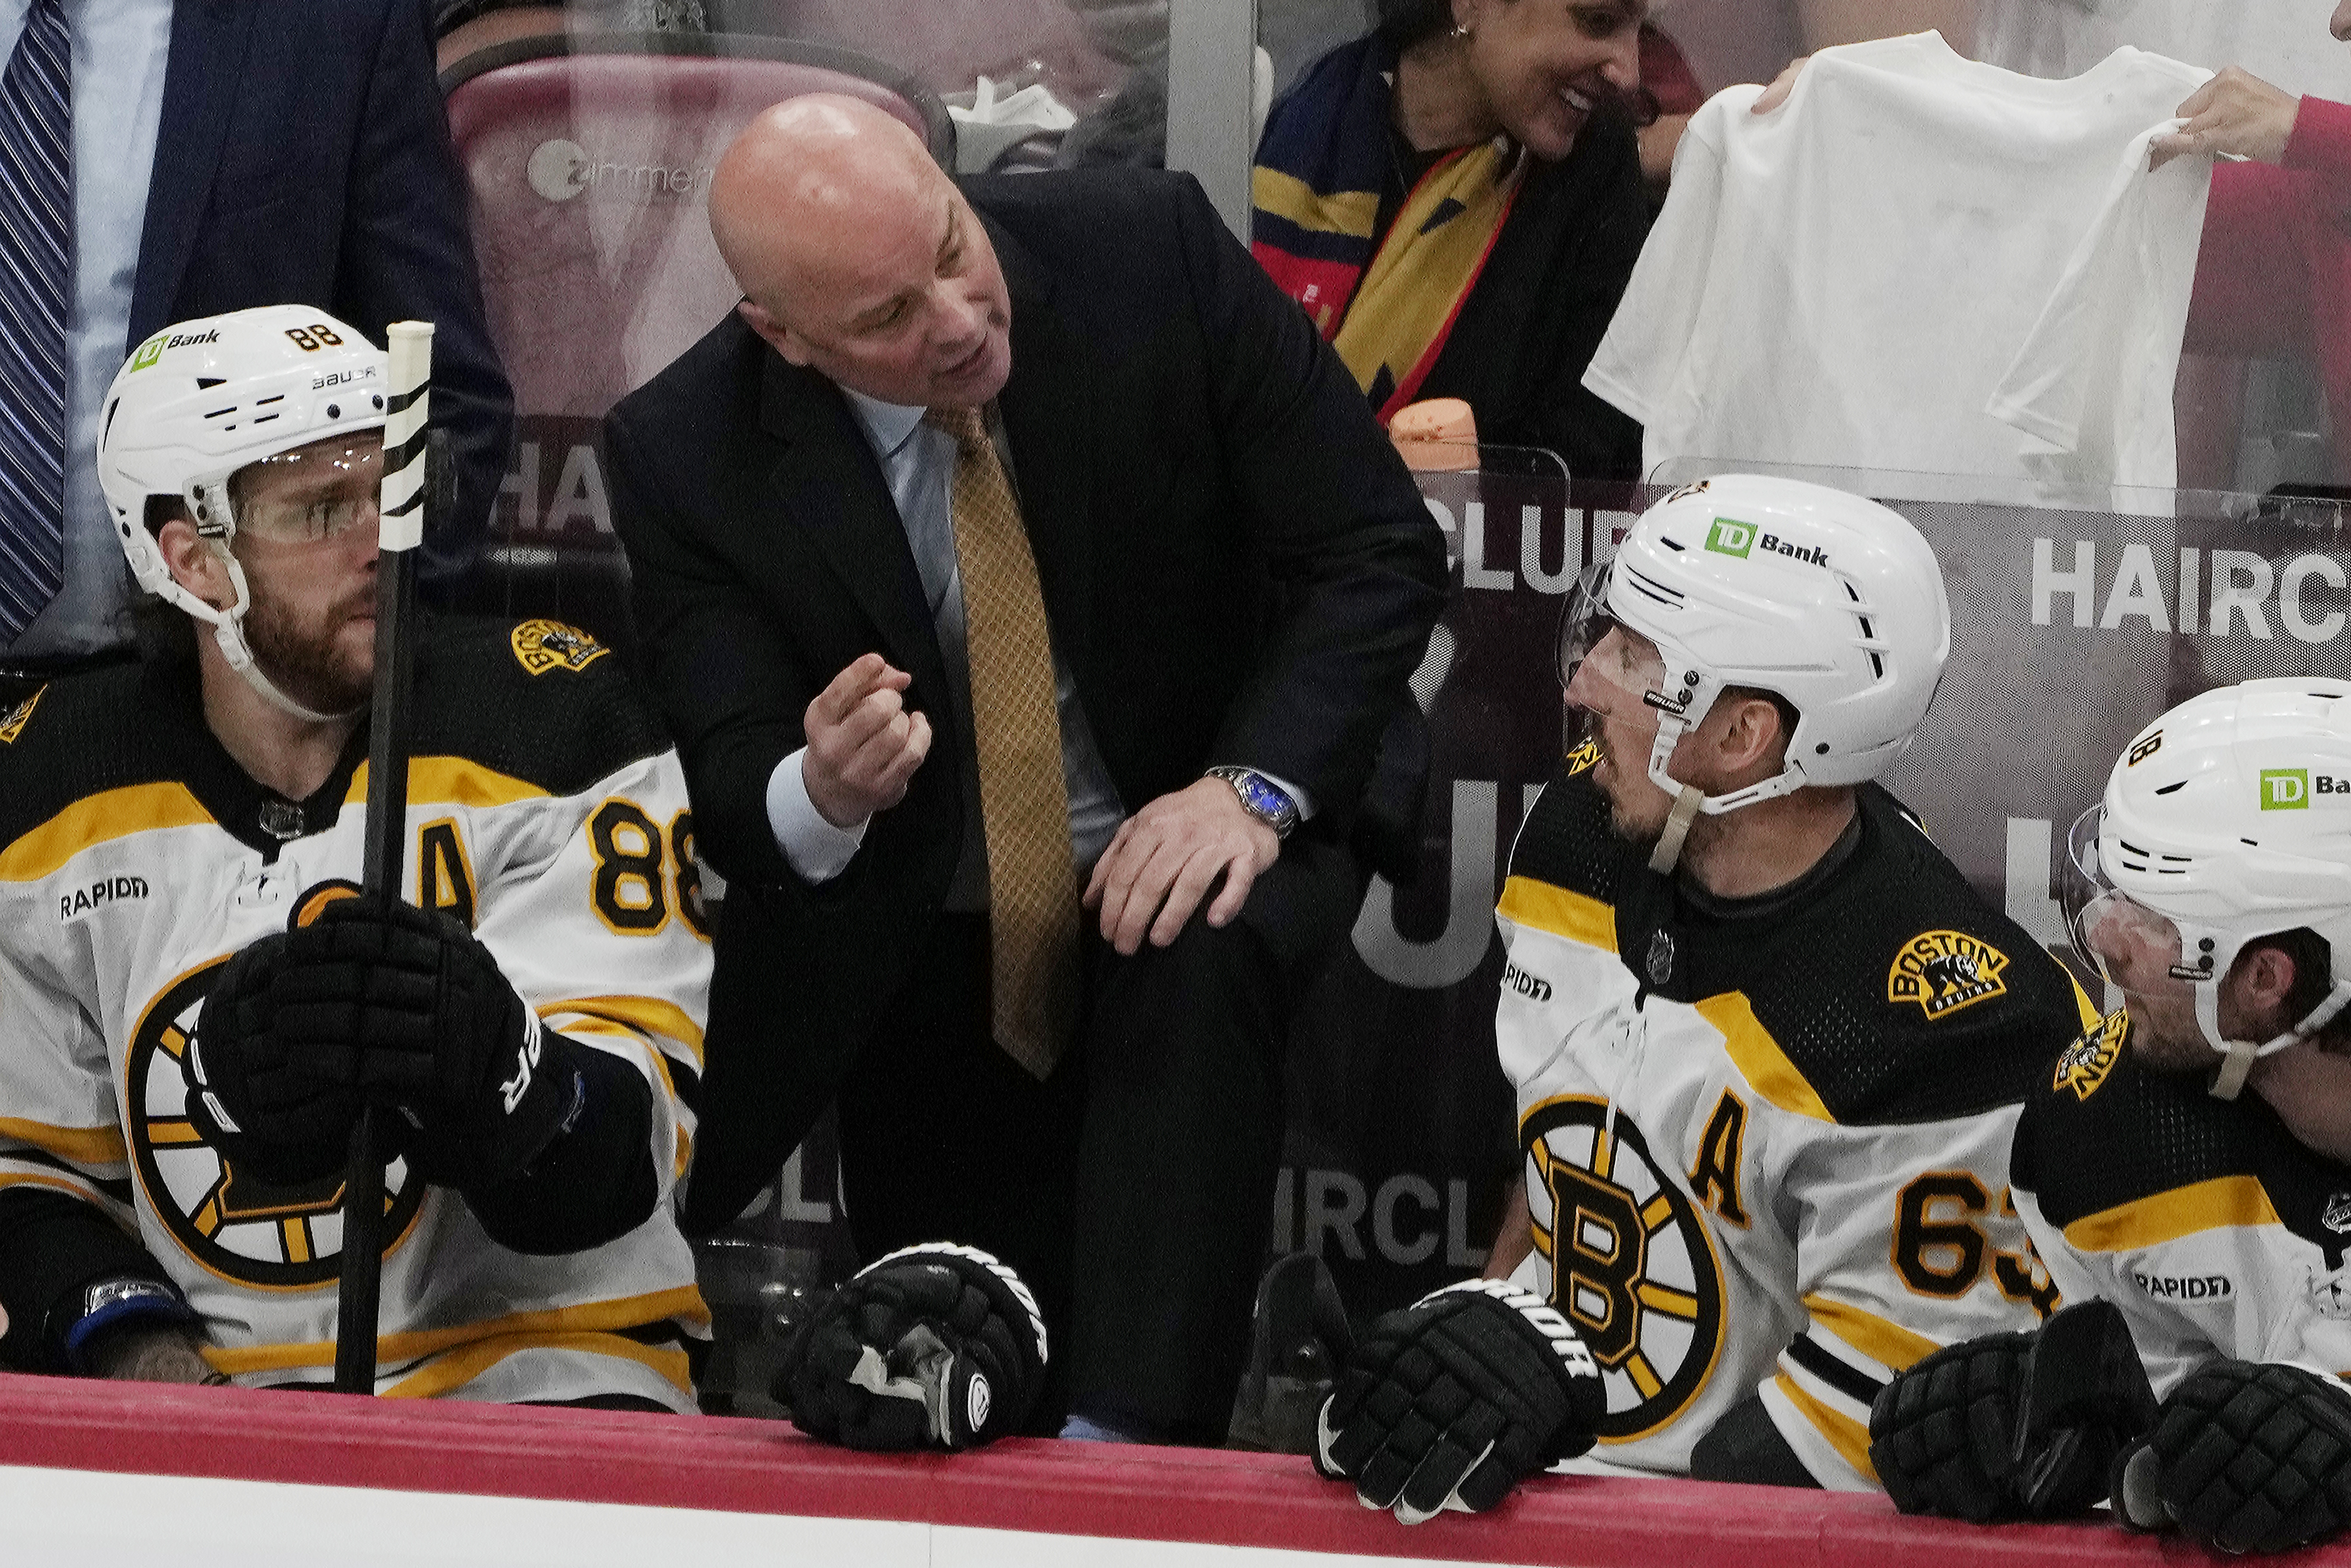 David Krejci, Bruins are living up to each other's expectations in his  return